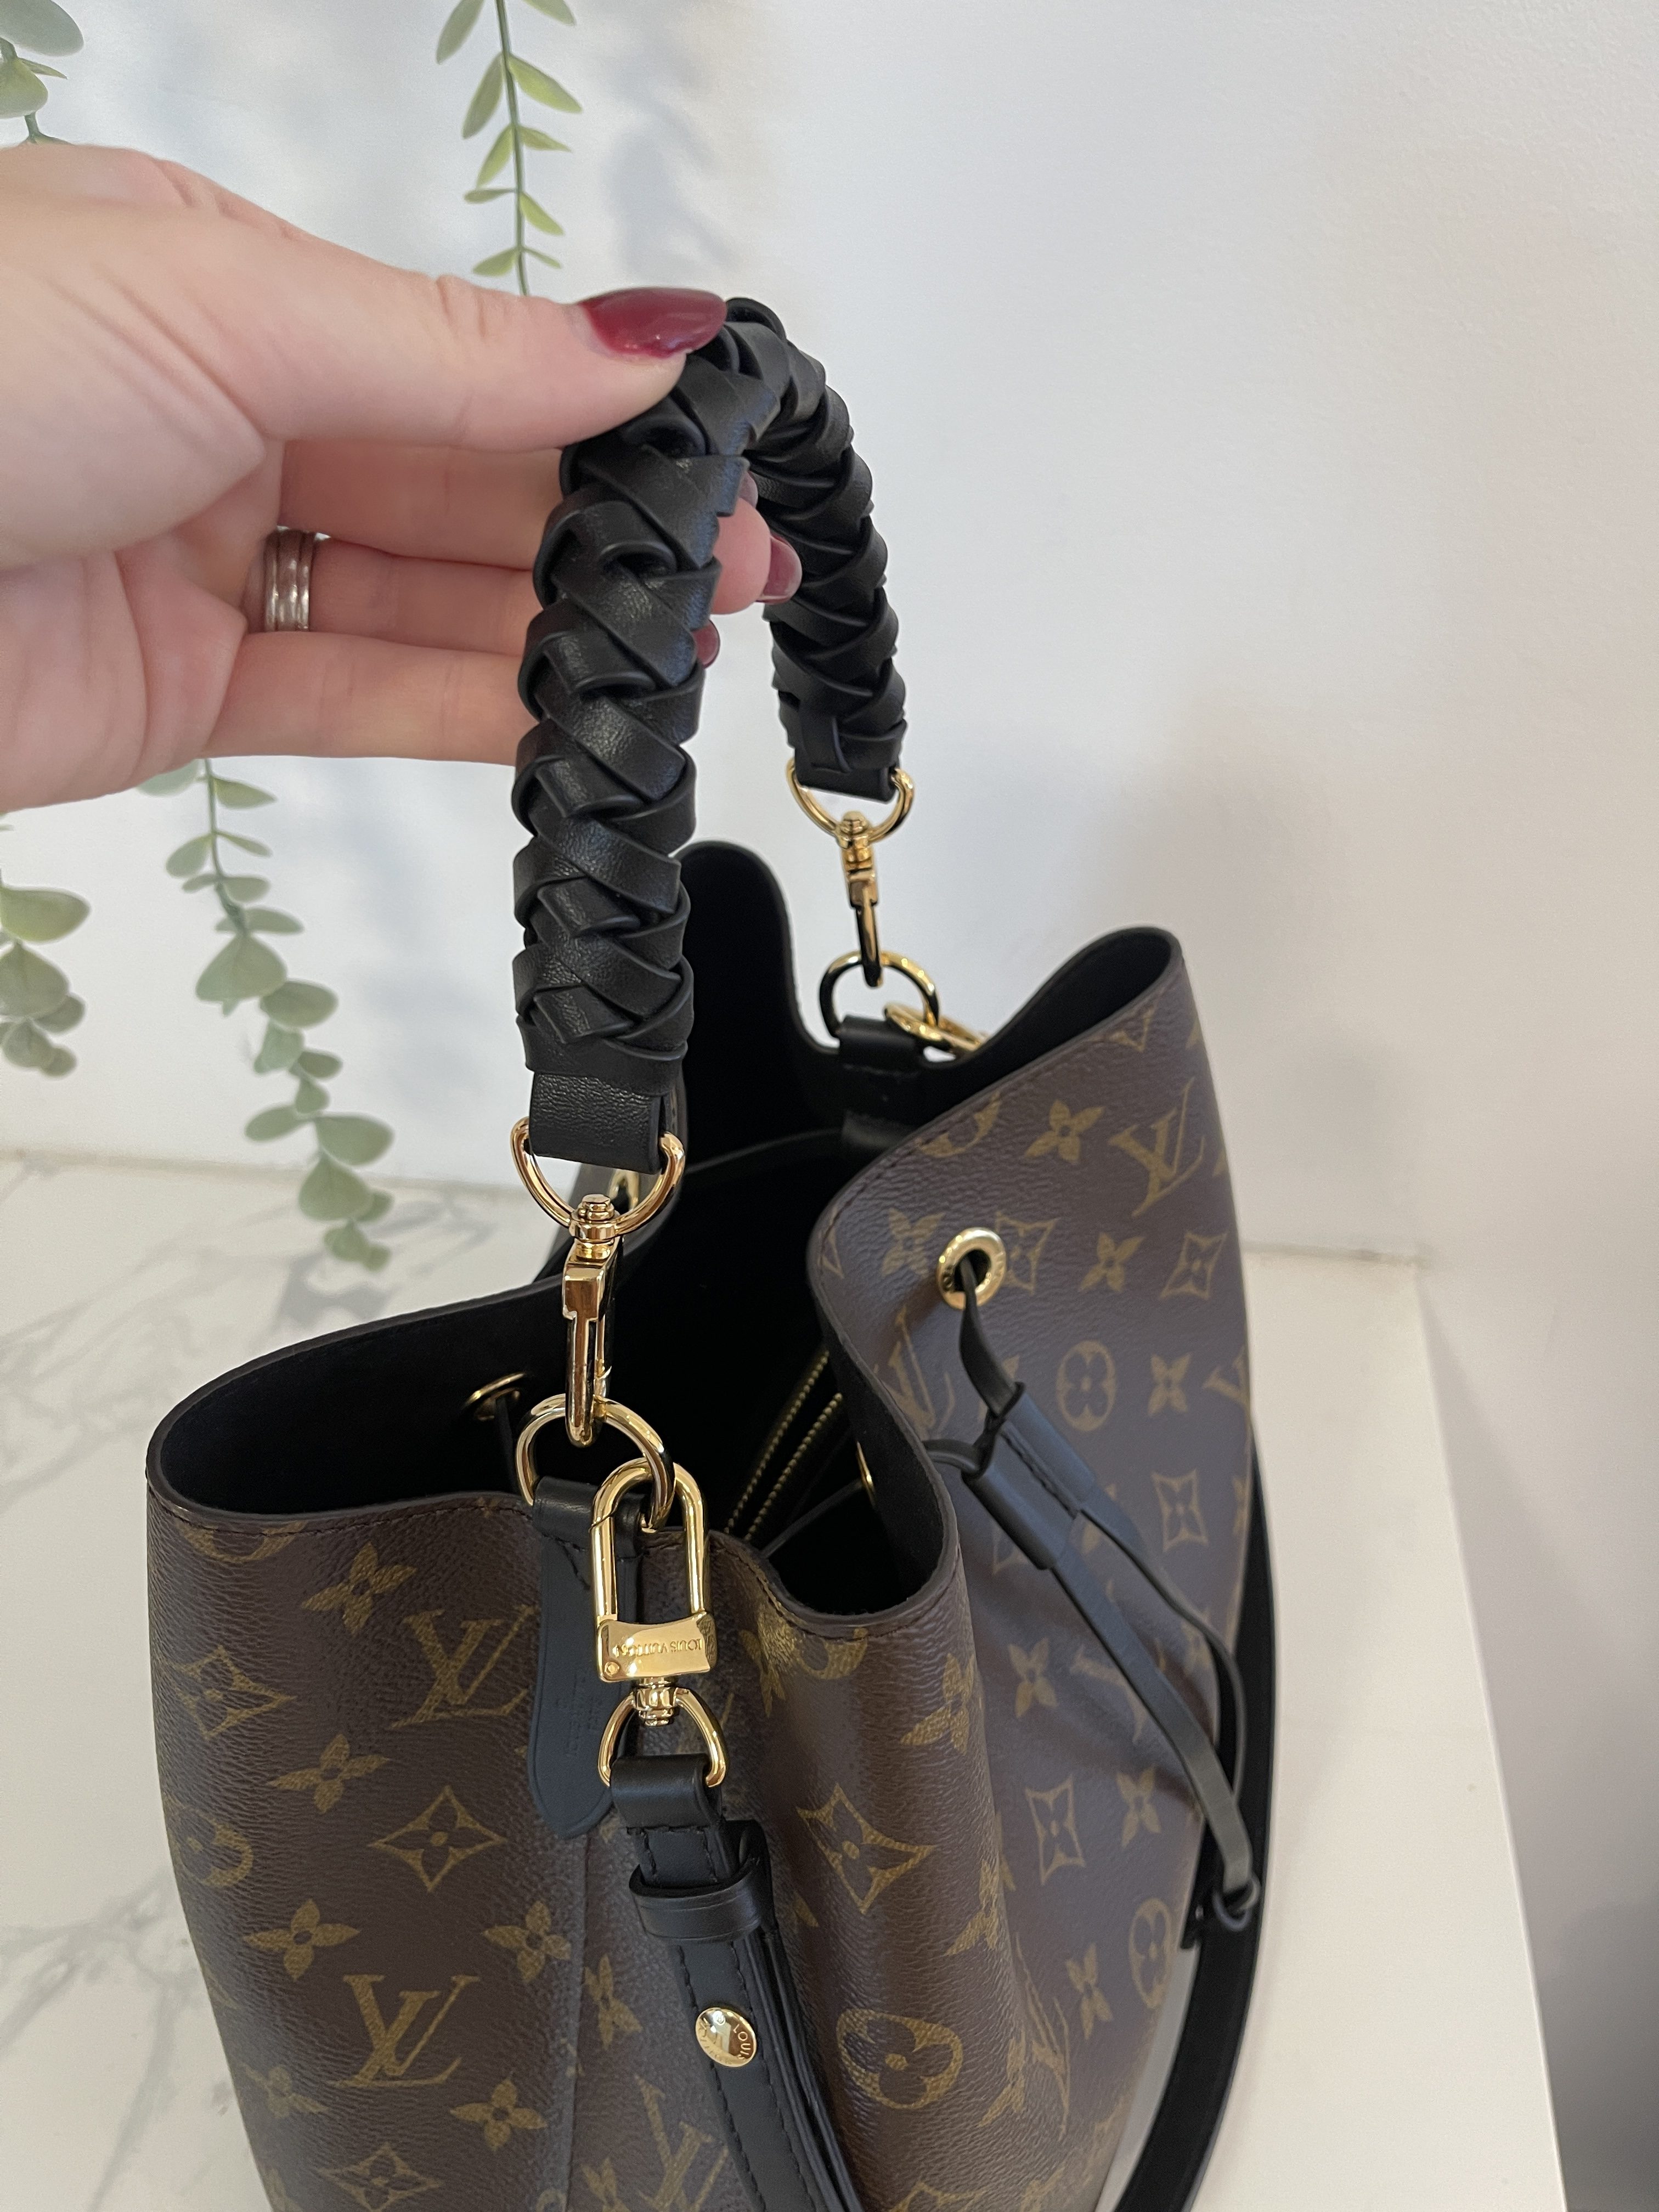 HER Authentic - Brand New Louis Vuitton Monogram Neo Noe Noir. Comes with  the dust bag, & strap. $1,675. DM for pictures & an invoice.